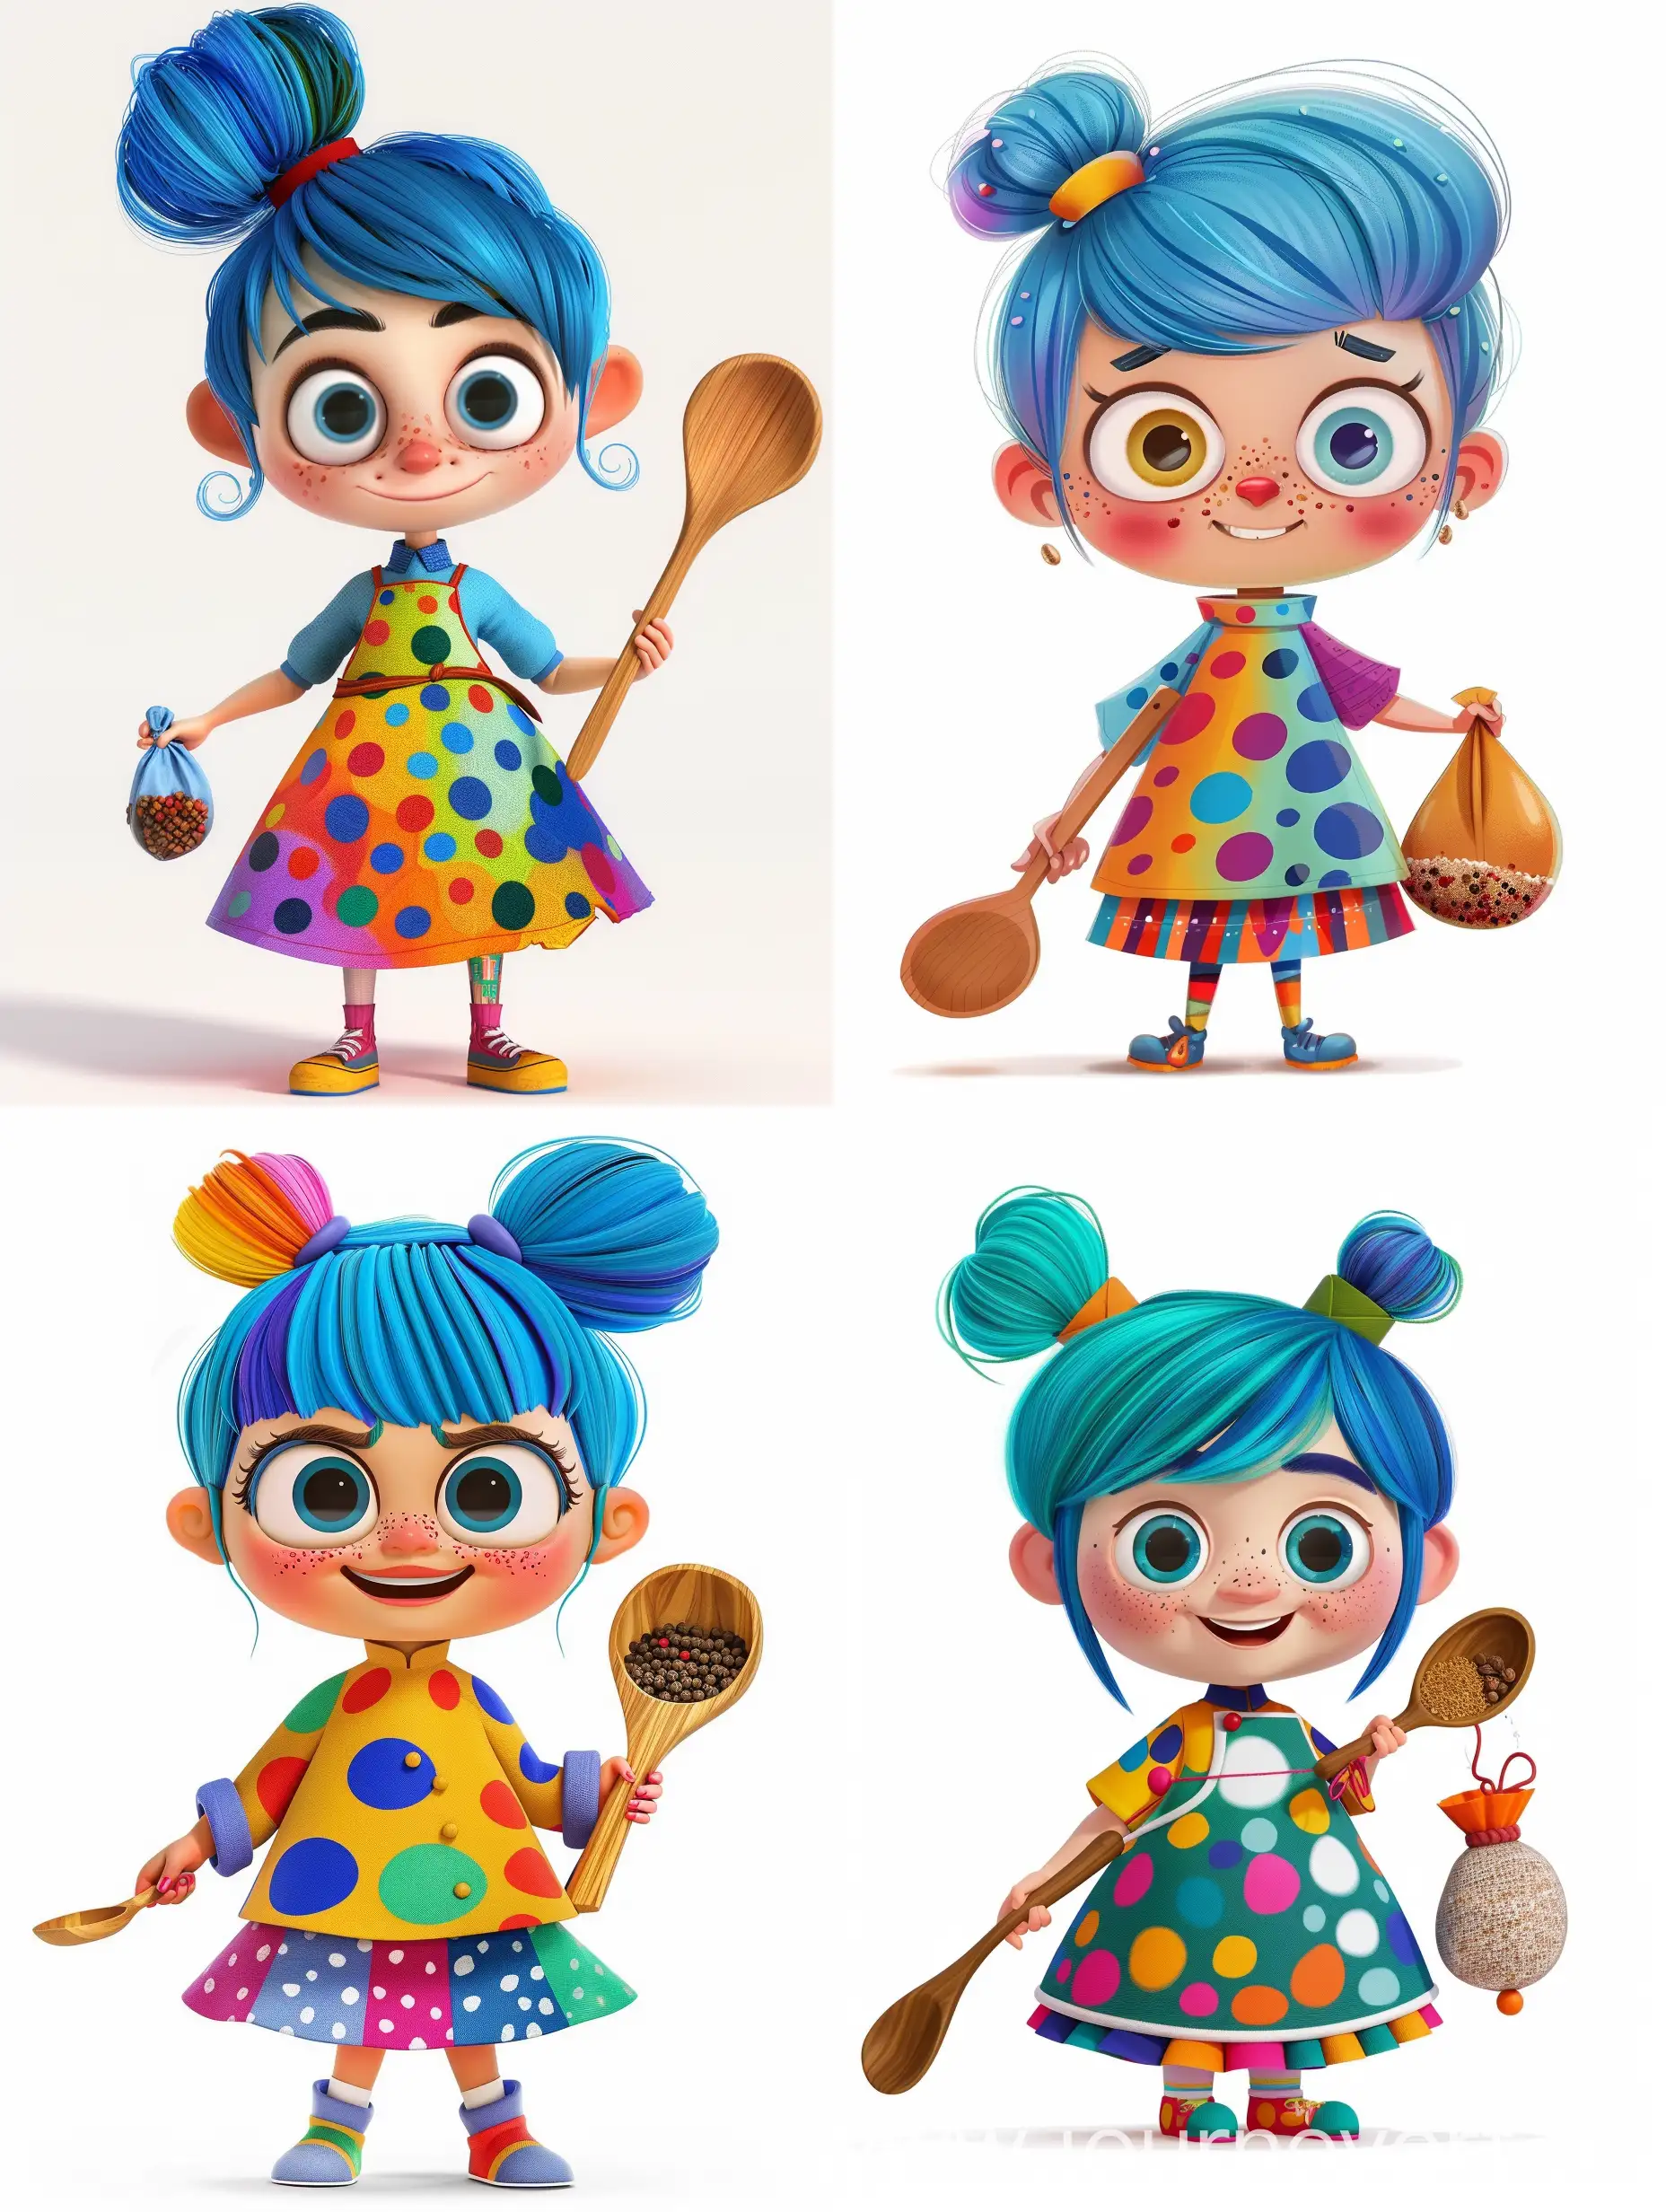 Energetic-Cartoon-Chef-Patty-with-Bright-Blue-Hair-and-Colorful-Chefs-Smock